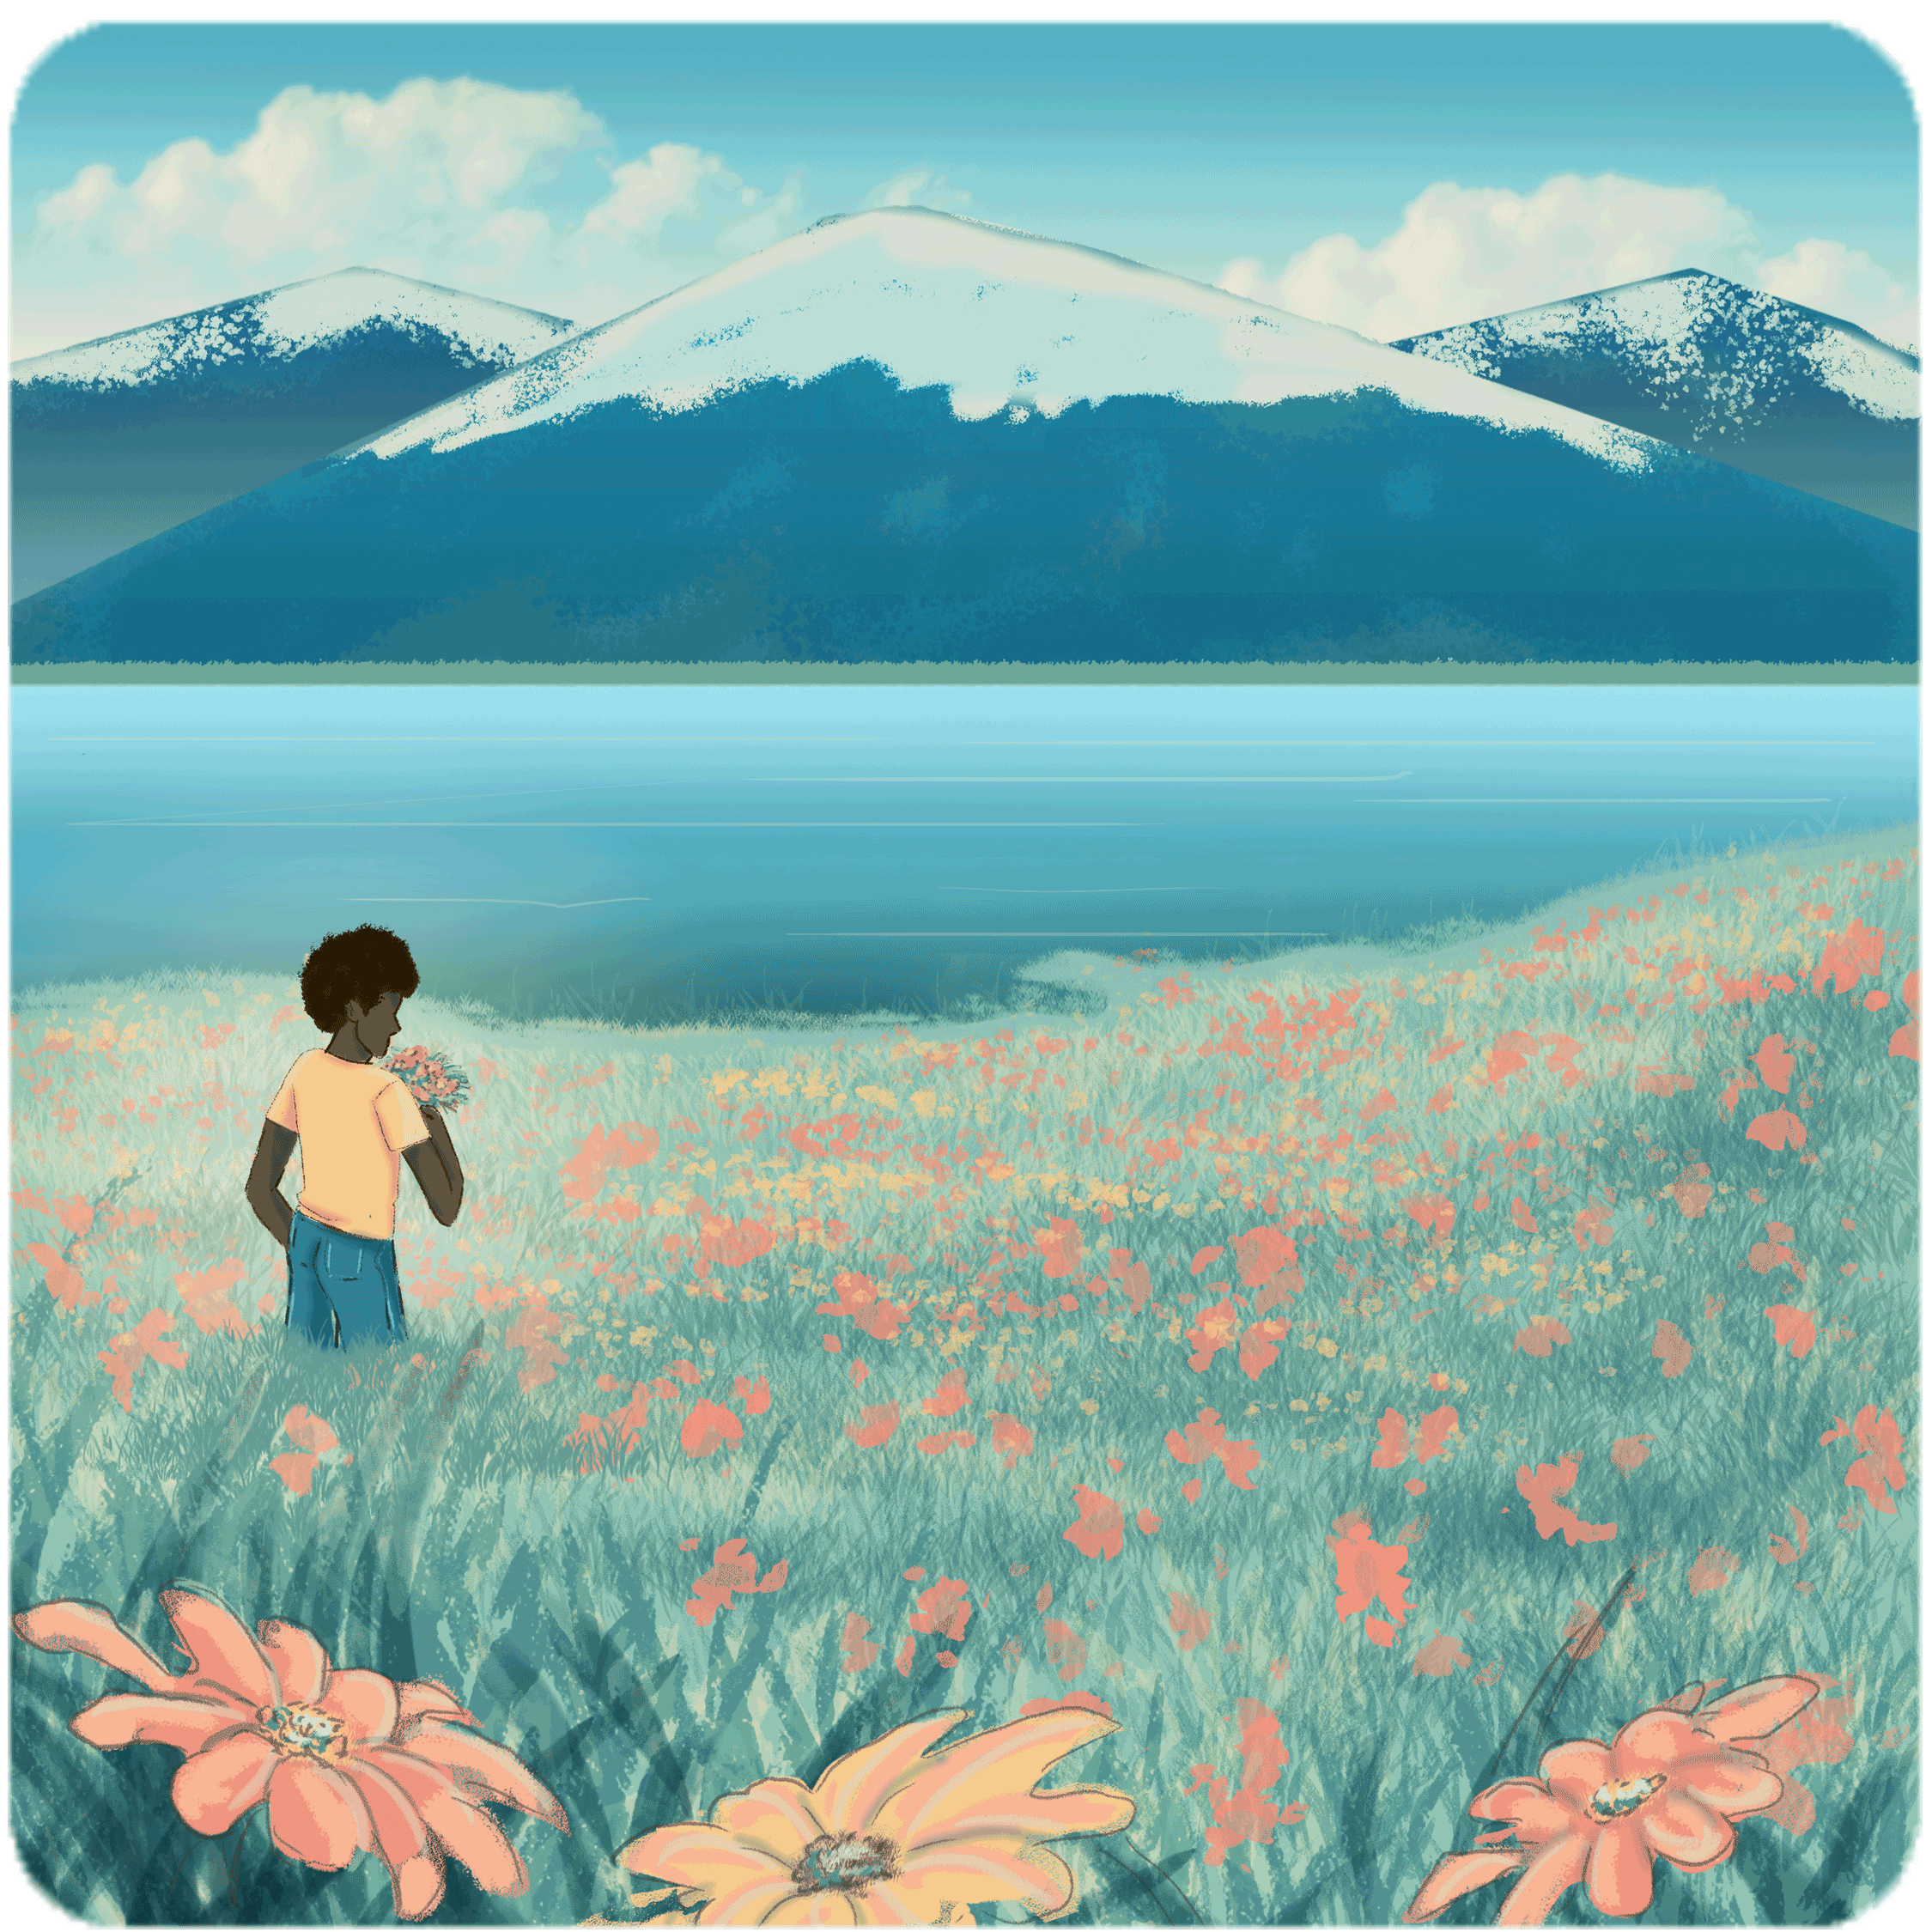 A male figure stands in a grassy area by a lake and a mountain range. The grassy area is scattered with wildflowers.